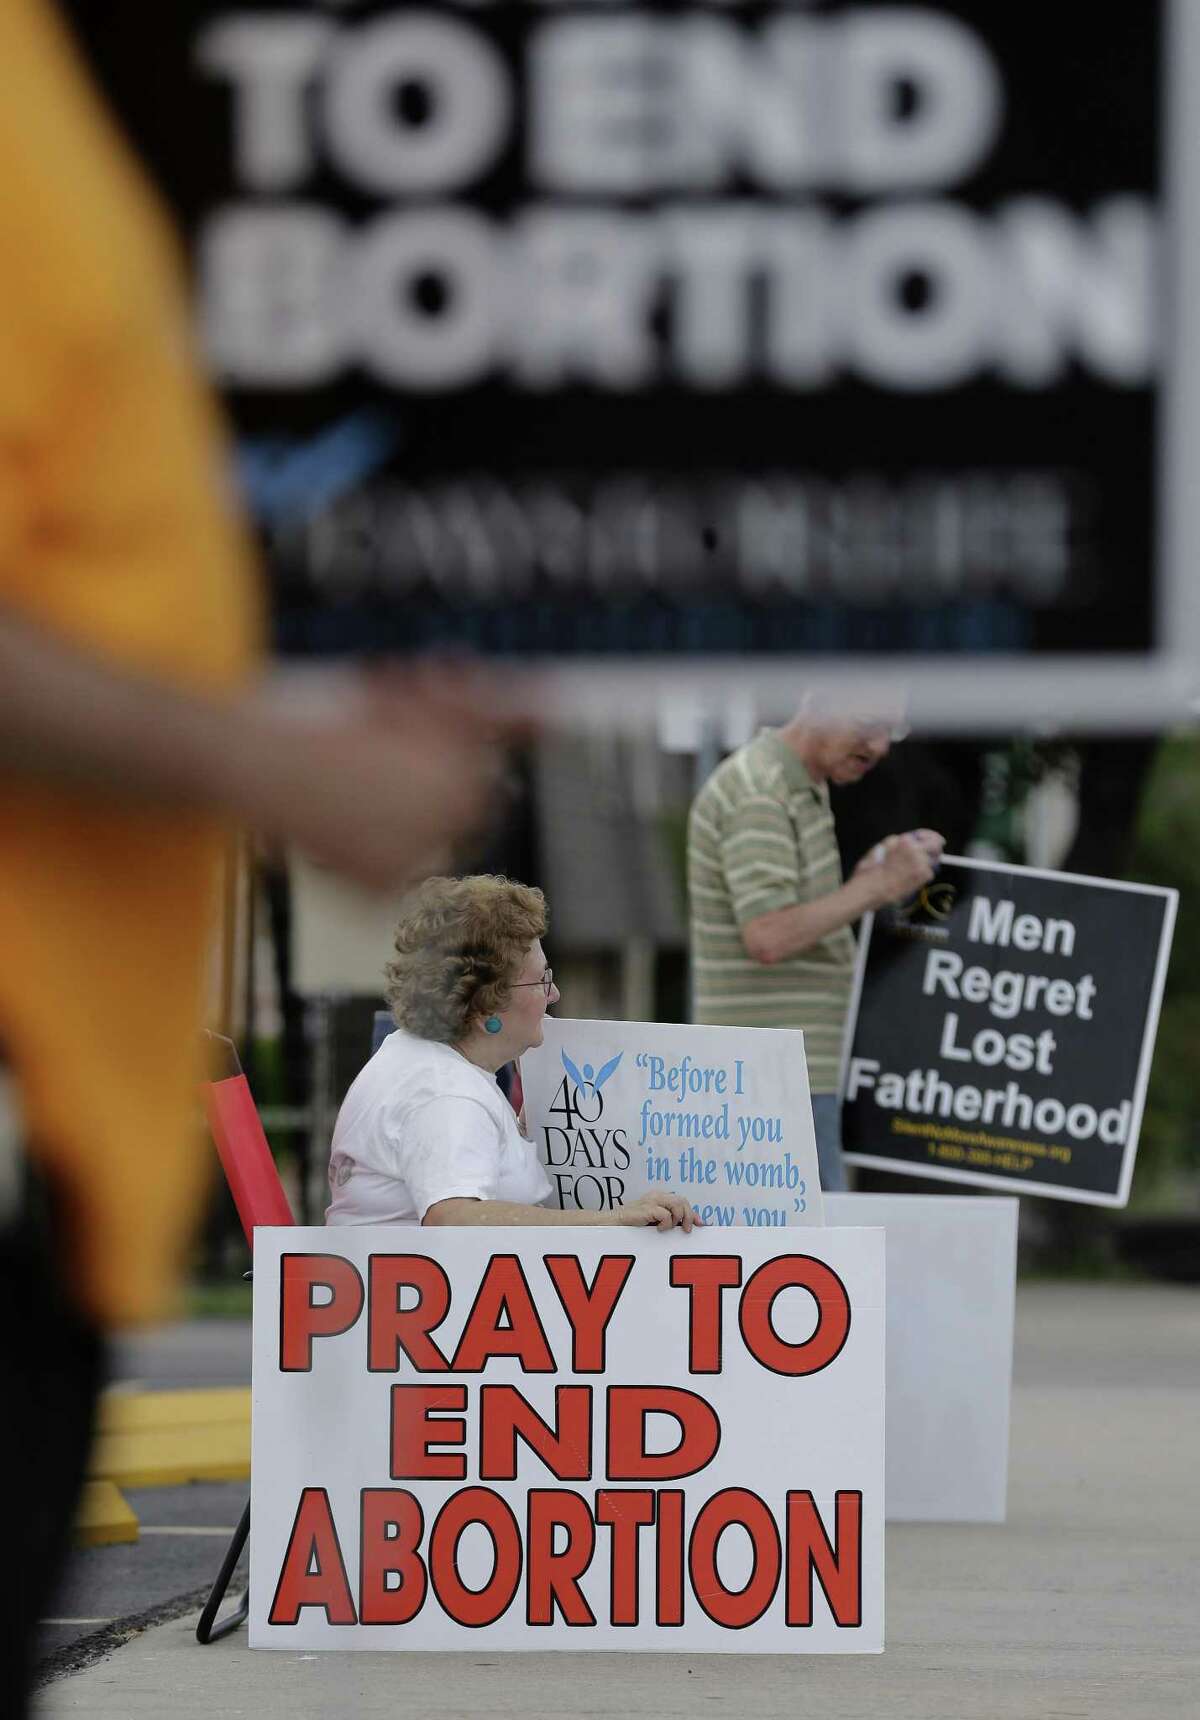 Dottie and Tom Knodell, opponents of abortion, hold signs outside a Planned Parenthood Clinic, in San Antonio in this 2013 photo. Wednesday capped a five-day trial before U.S. District Judge Lee Yeakel on Texas abortion procedures.